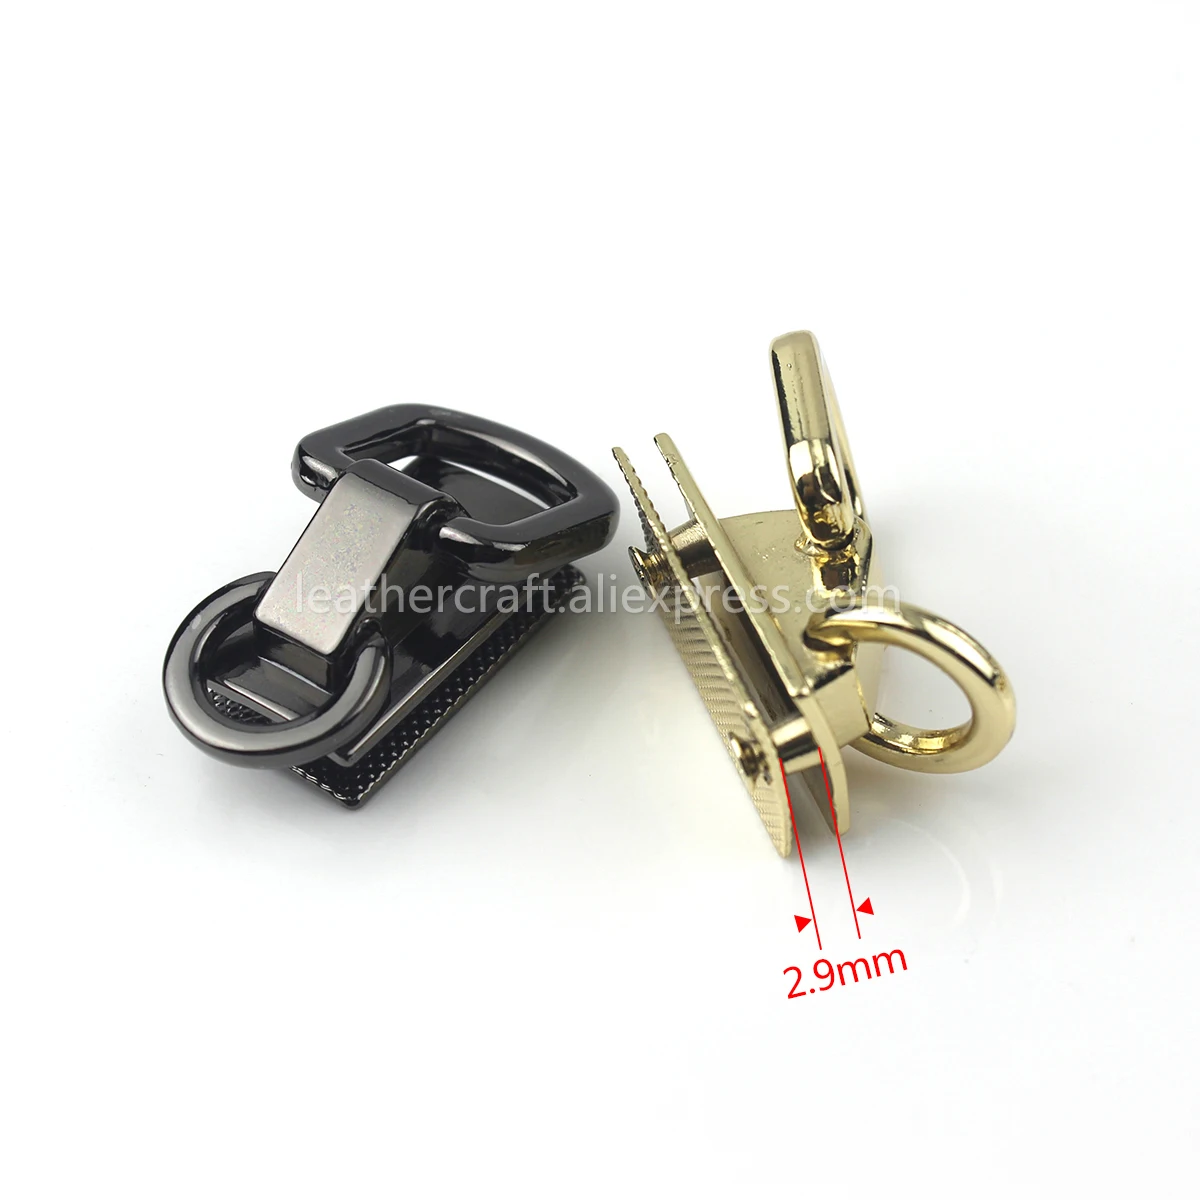 2pcs Metal Handle Holder Bag Side Anchor Gusset Clamps Link Hardware O-ring  Eye for Bag Purse Strap Hardware Accessories - AliExpress